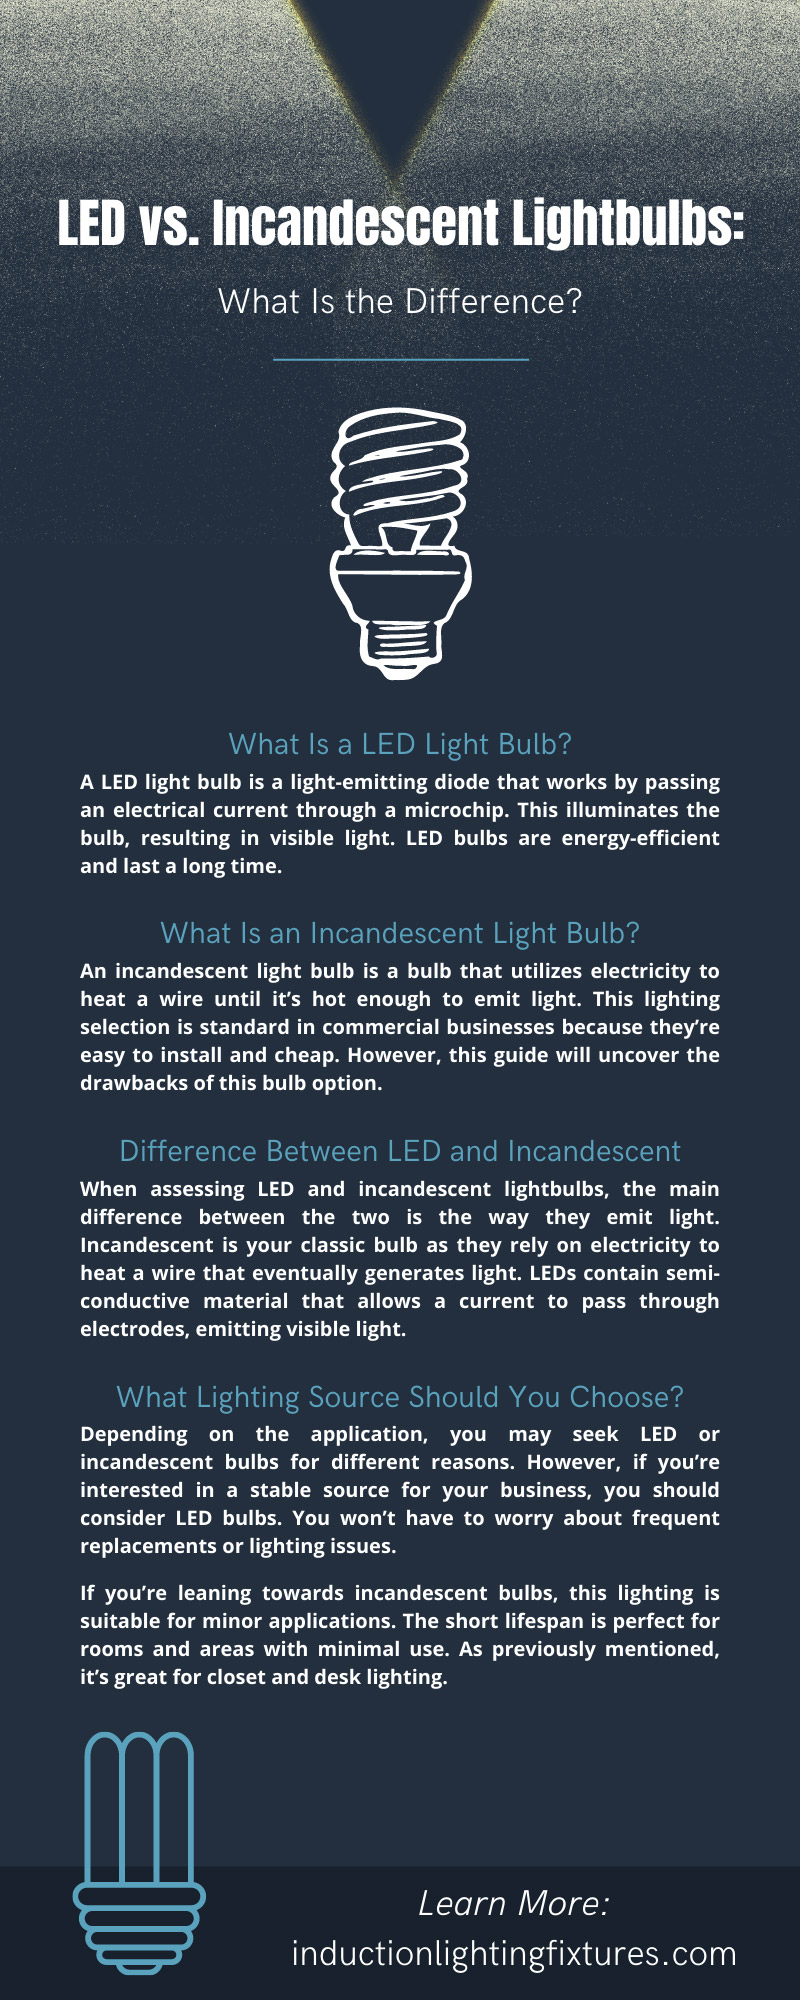 LED vs. Incandescent Lightbulbs: What Is the Difference?